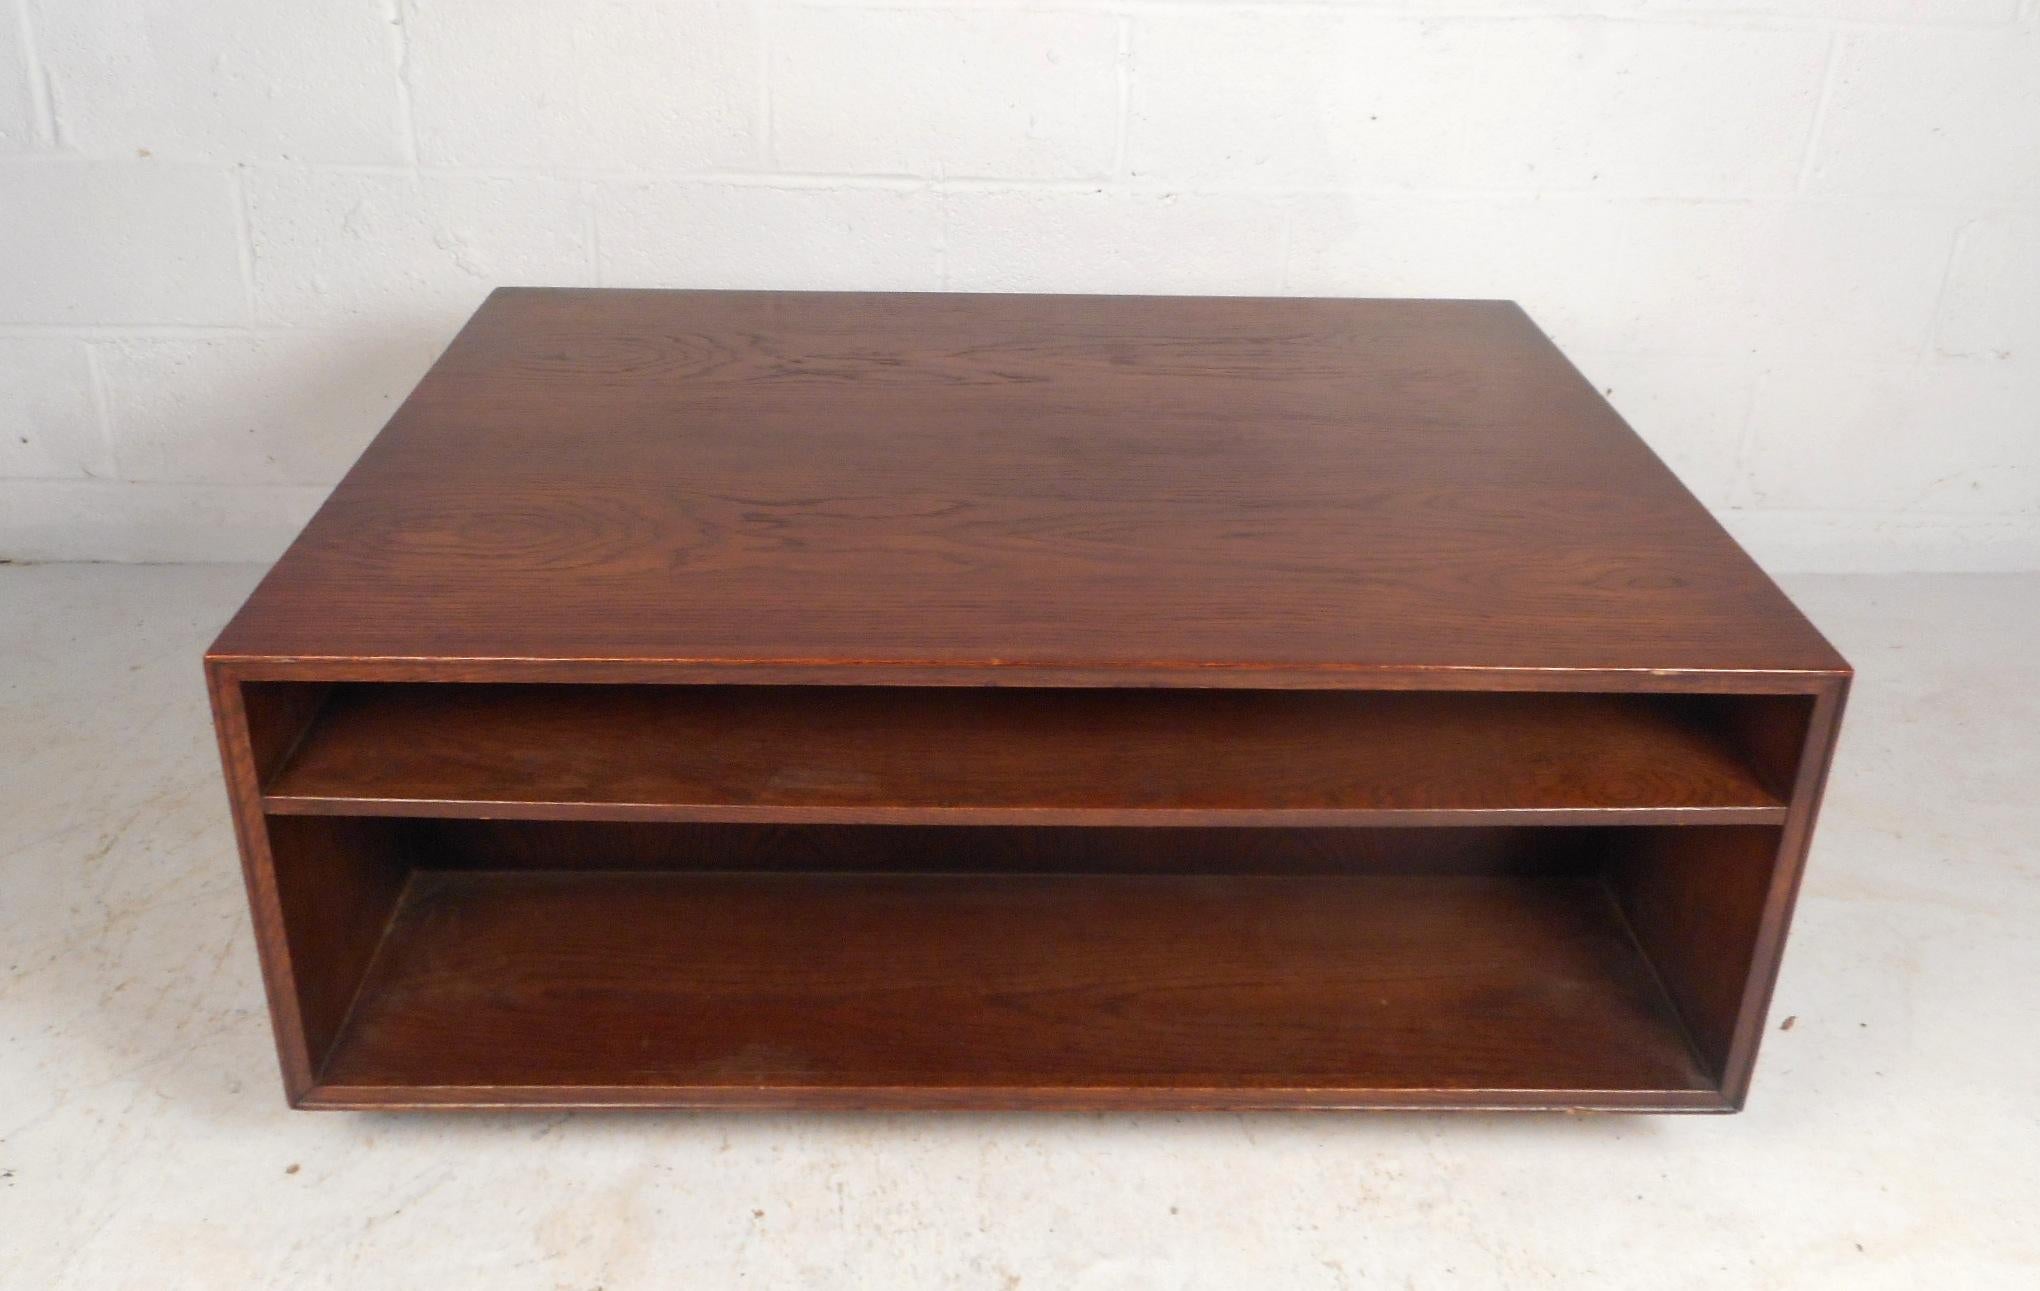 Late 20th Century Unique Midcentury Walnut Coffee Table with Storage Compartments